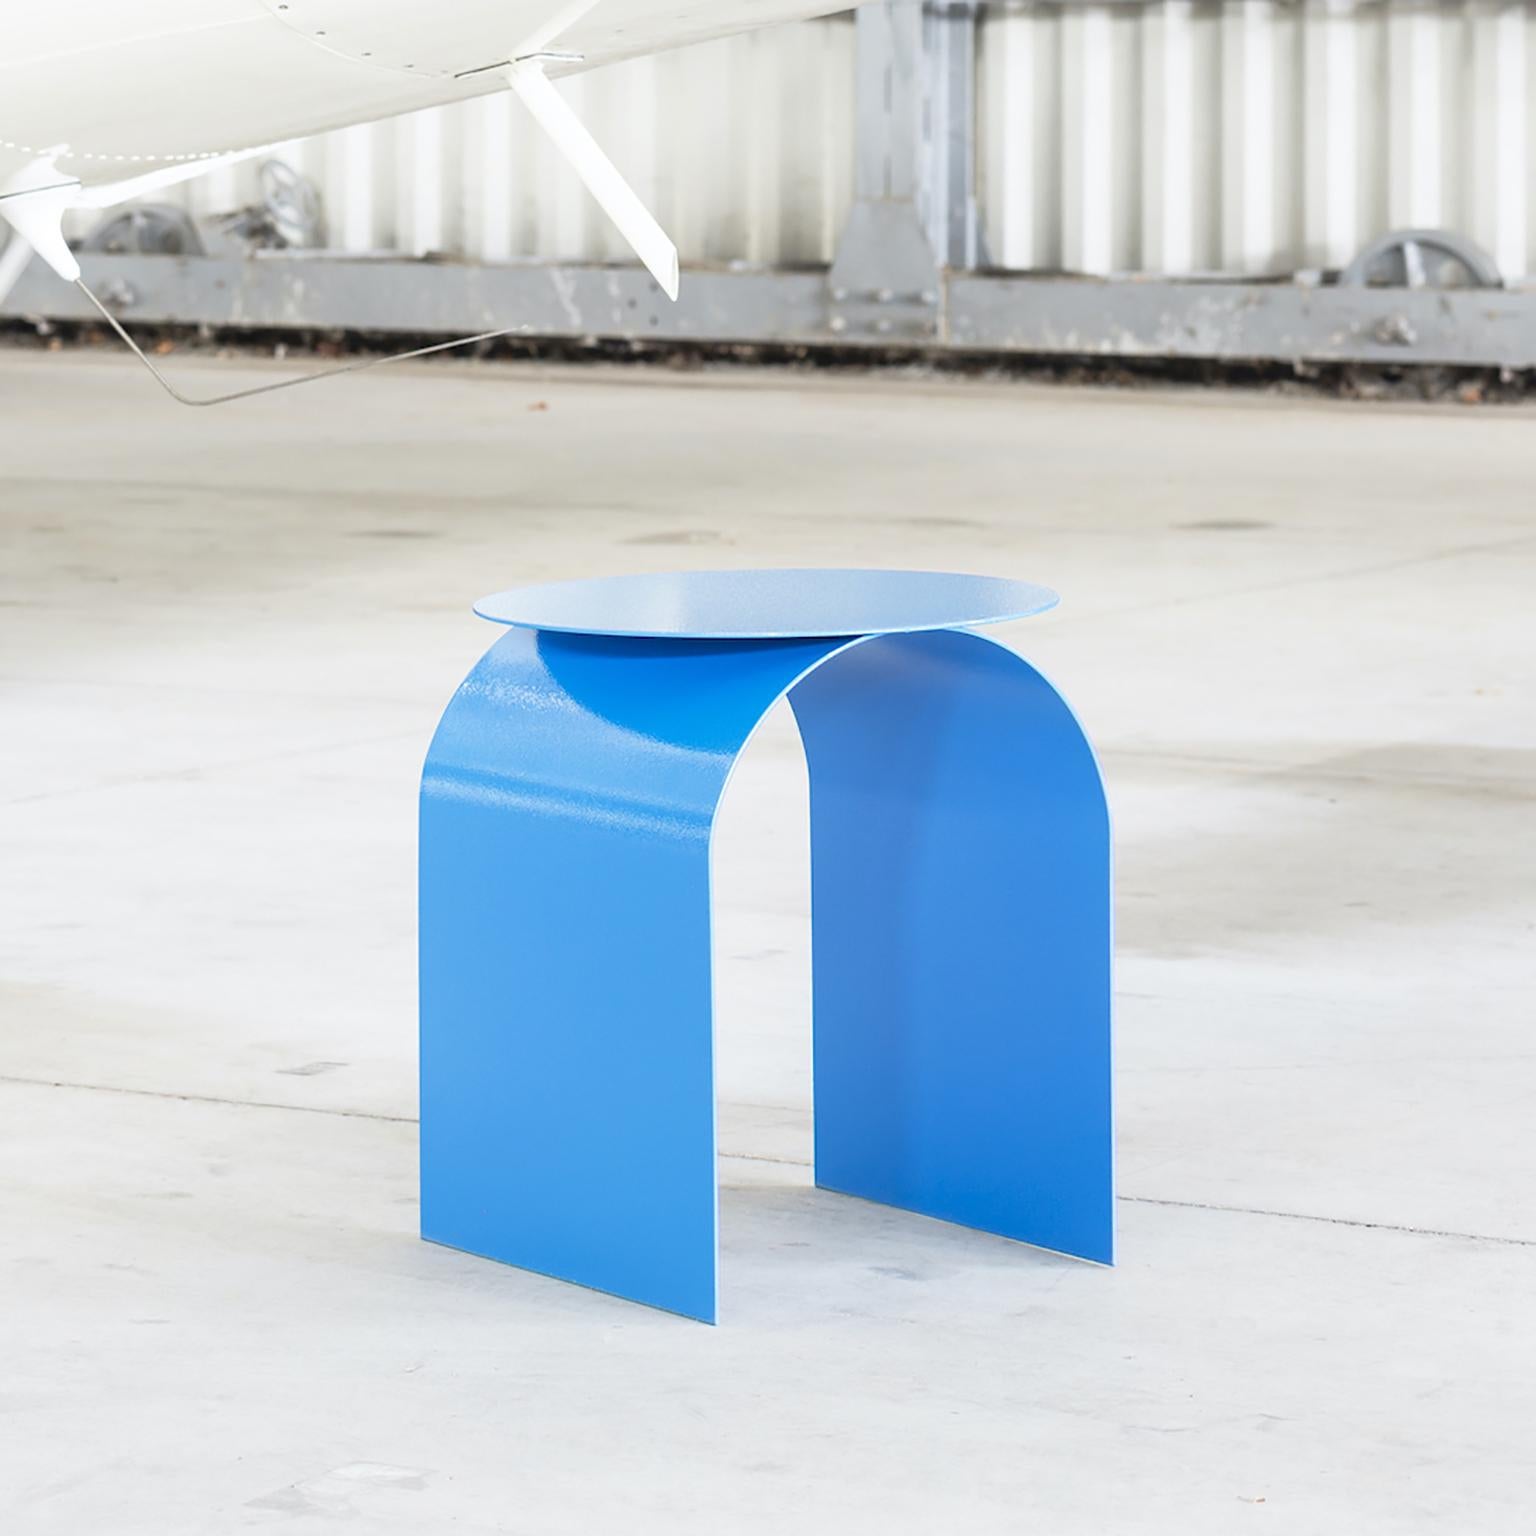 The neoclassical essentiality of the stool is inspired by the iconic architectures of Andrea Palladio. Crafted in air-thin metal and finished in bright colours, the Palladium side table is defined by the play of light and shadows on its